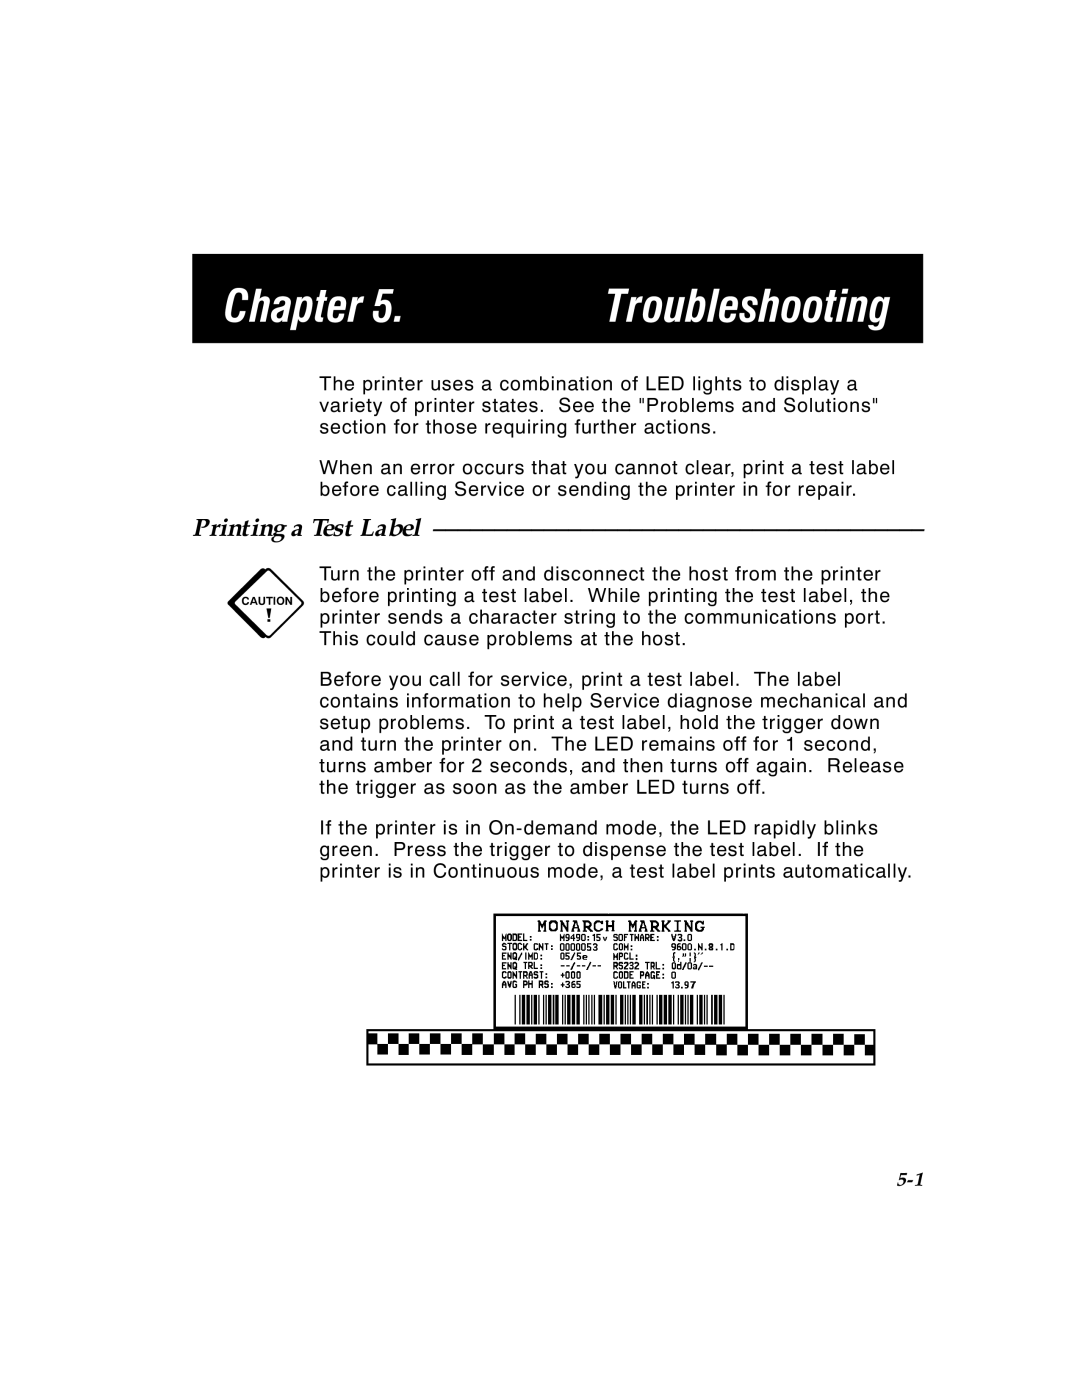 Paxar 4 manual Troubleshooting, Printing a Test Label, Chapter 